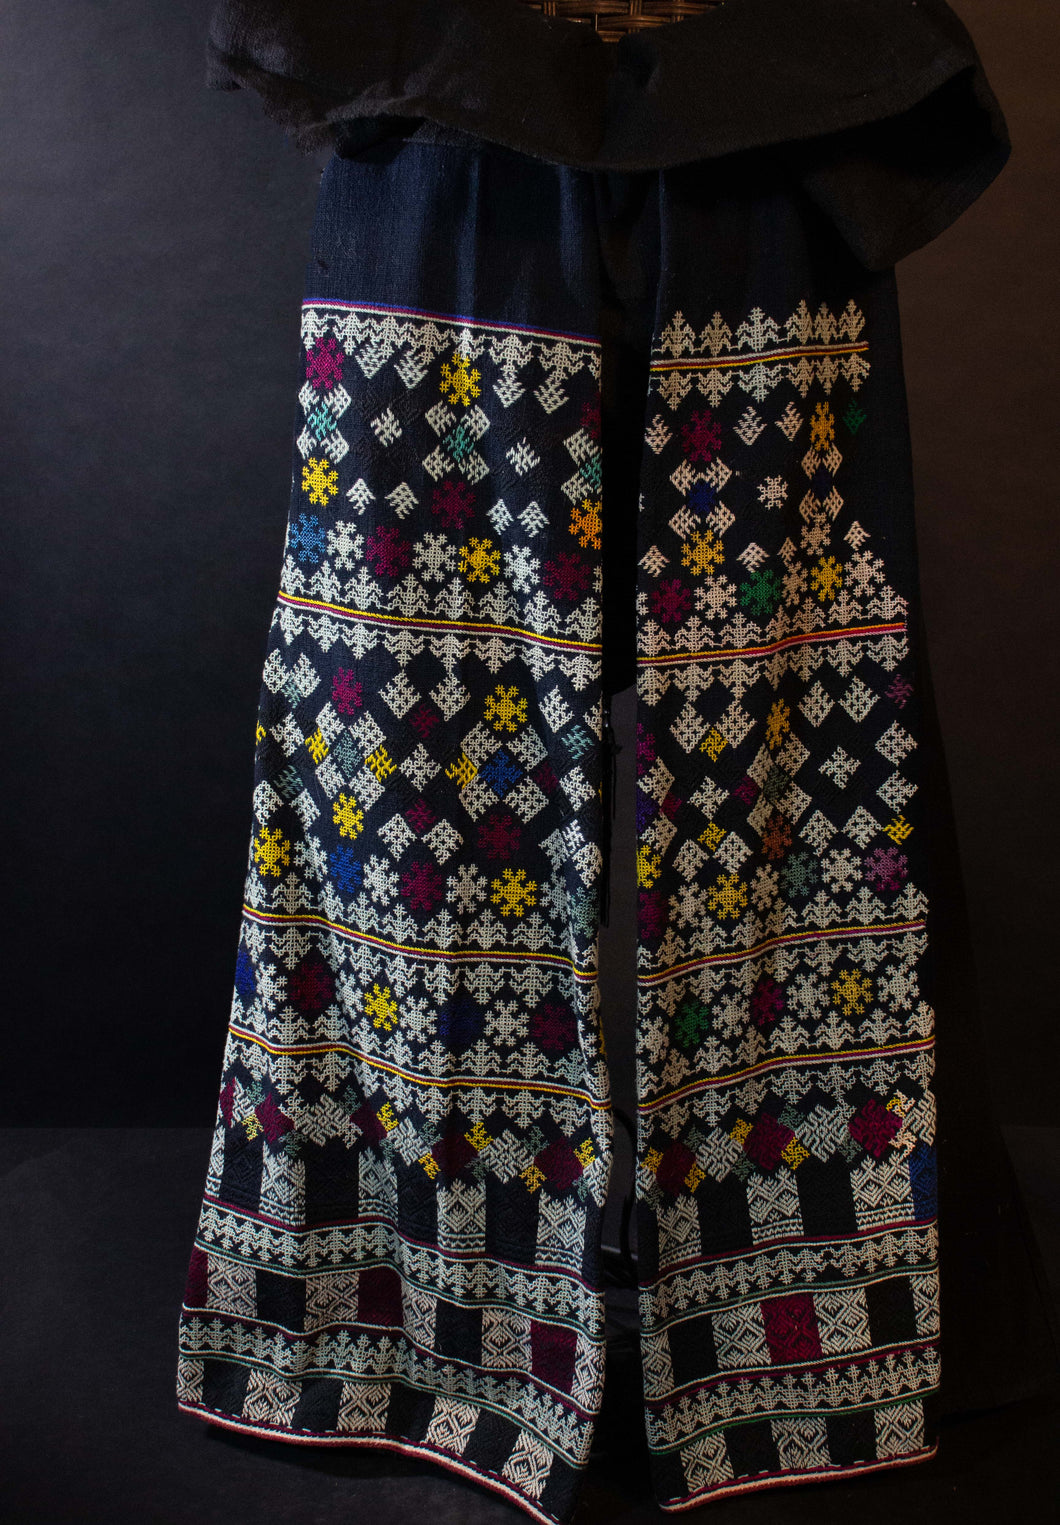 Mien or Yao Vintage Cross-stitched Embroidered Pants from Yunnan Province.